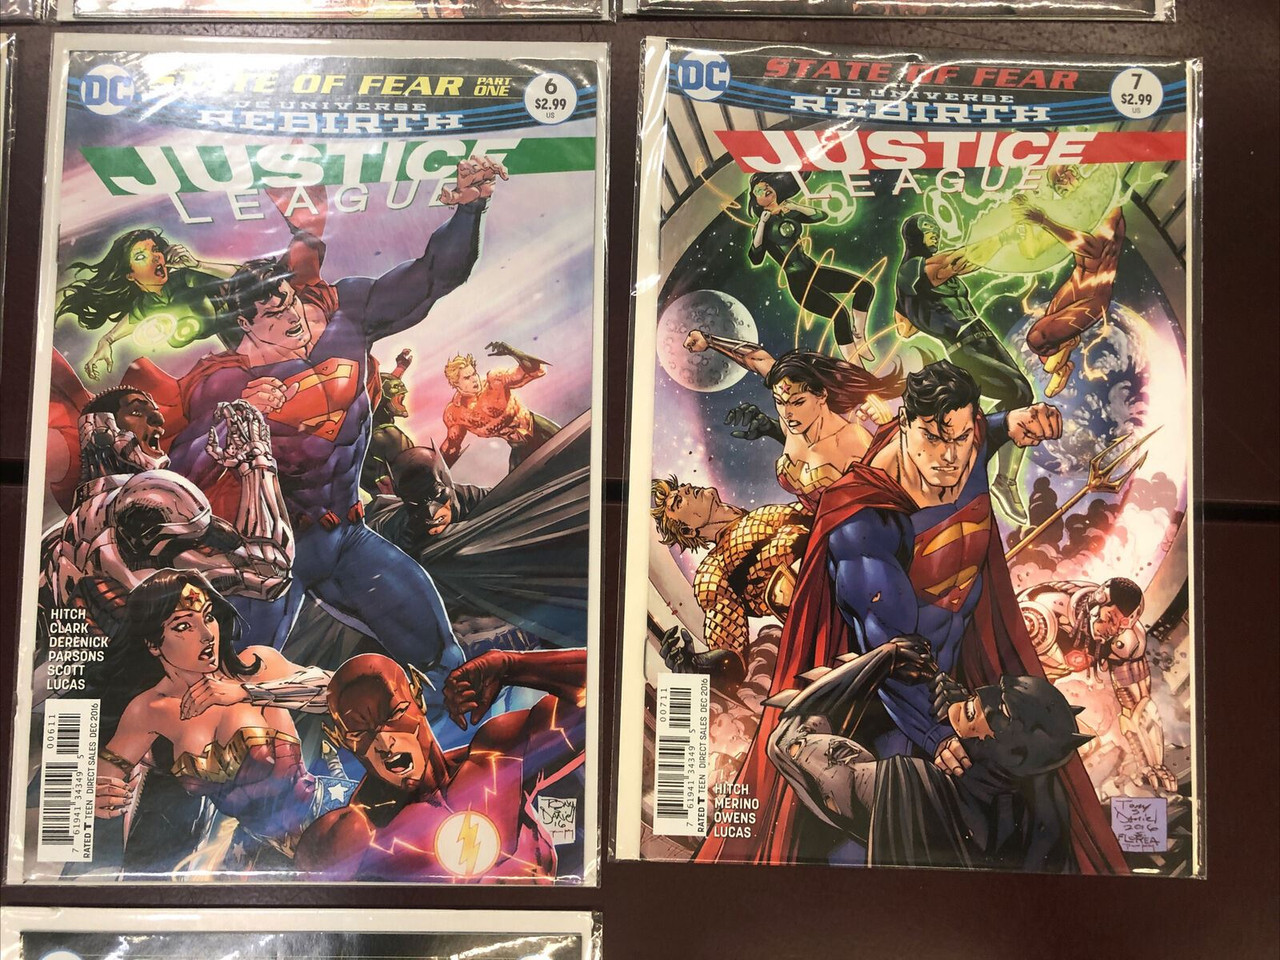 DC UNIVERSE REBIRTH JUSTICE LEAGUE 1-10 (-9) + VARIANT #1 2016 COMIC - PREOWNED